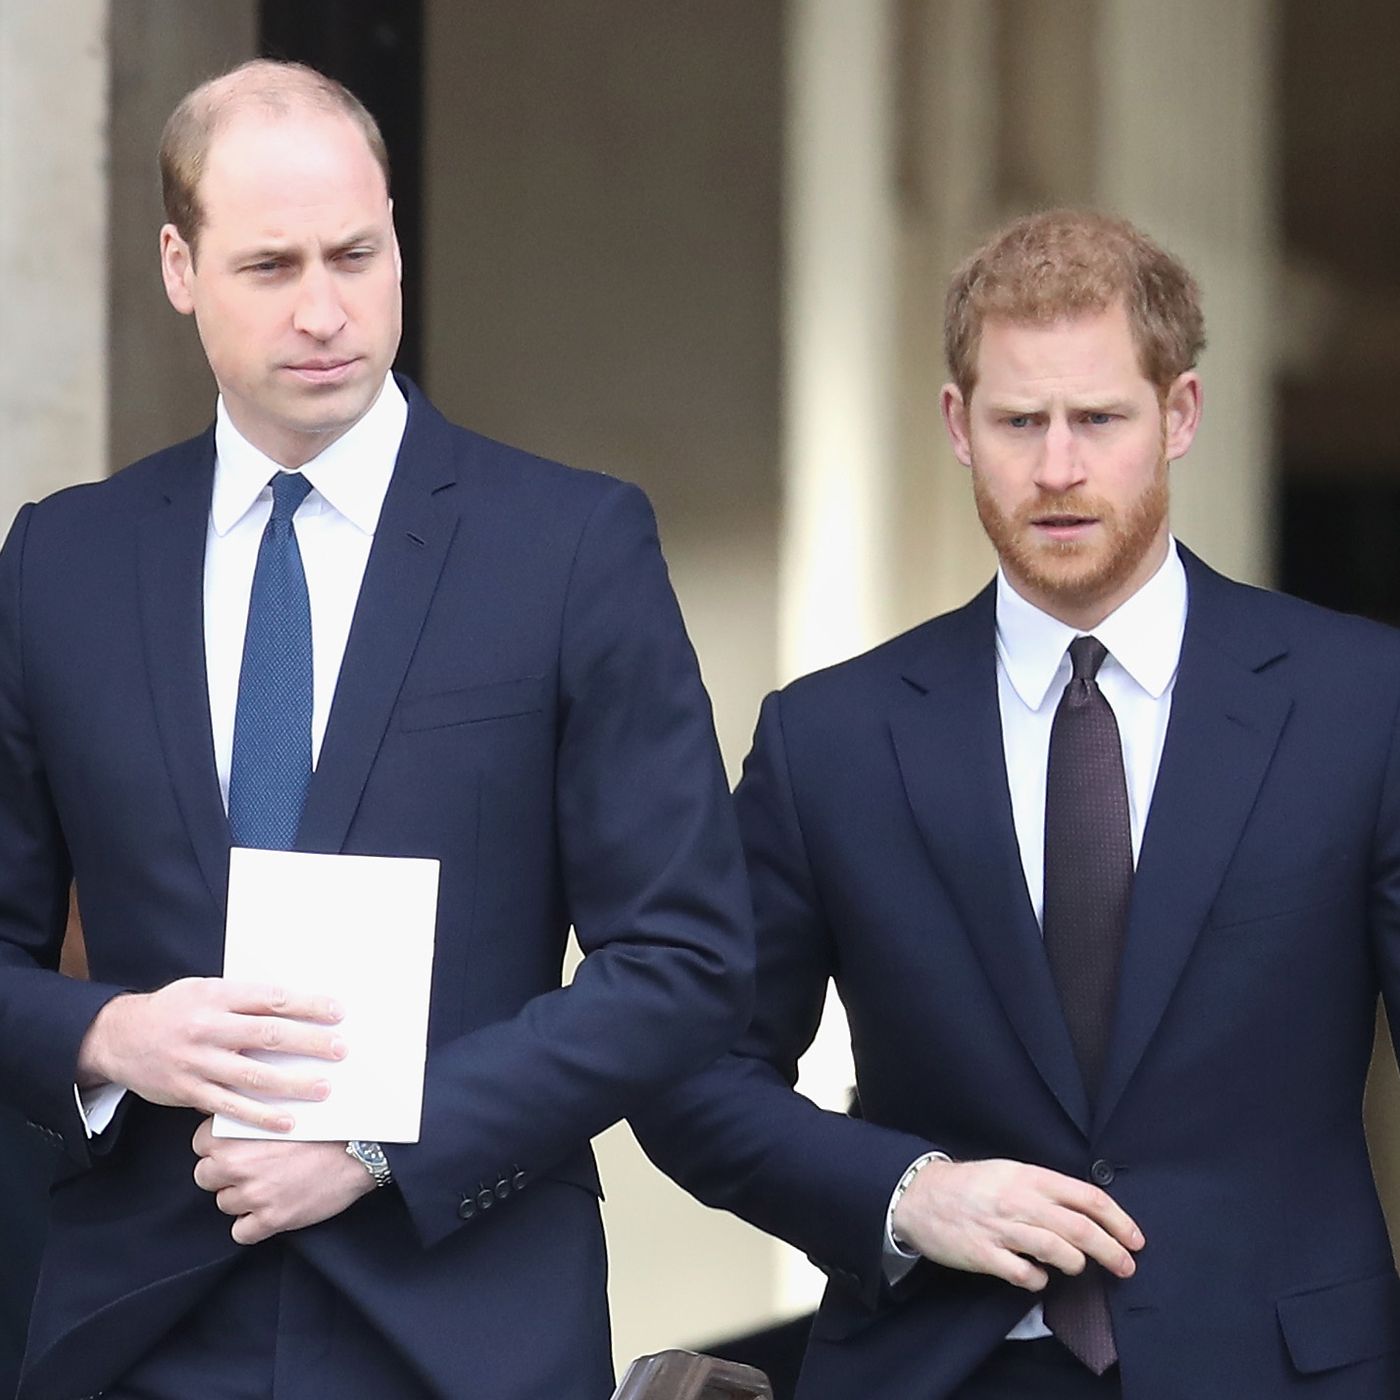 Prince Harry Claims William Attacked Him in Memoir 'Spare'